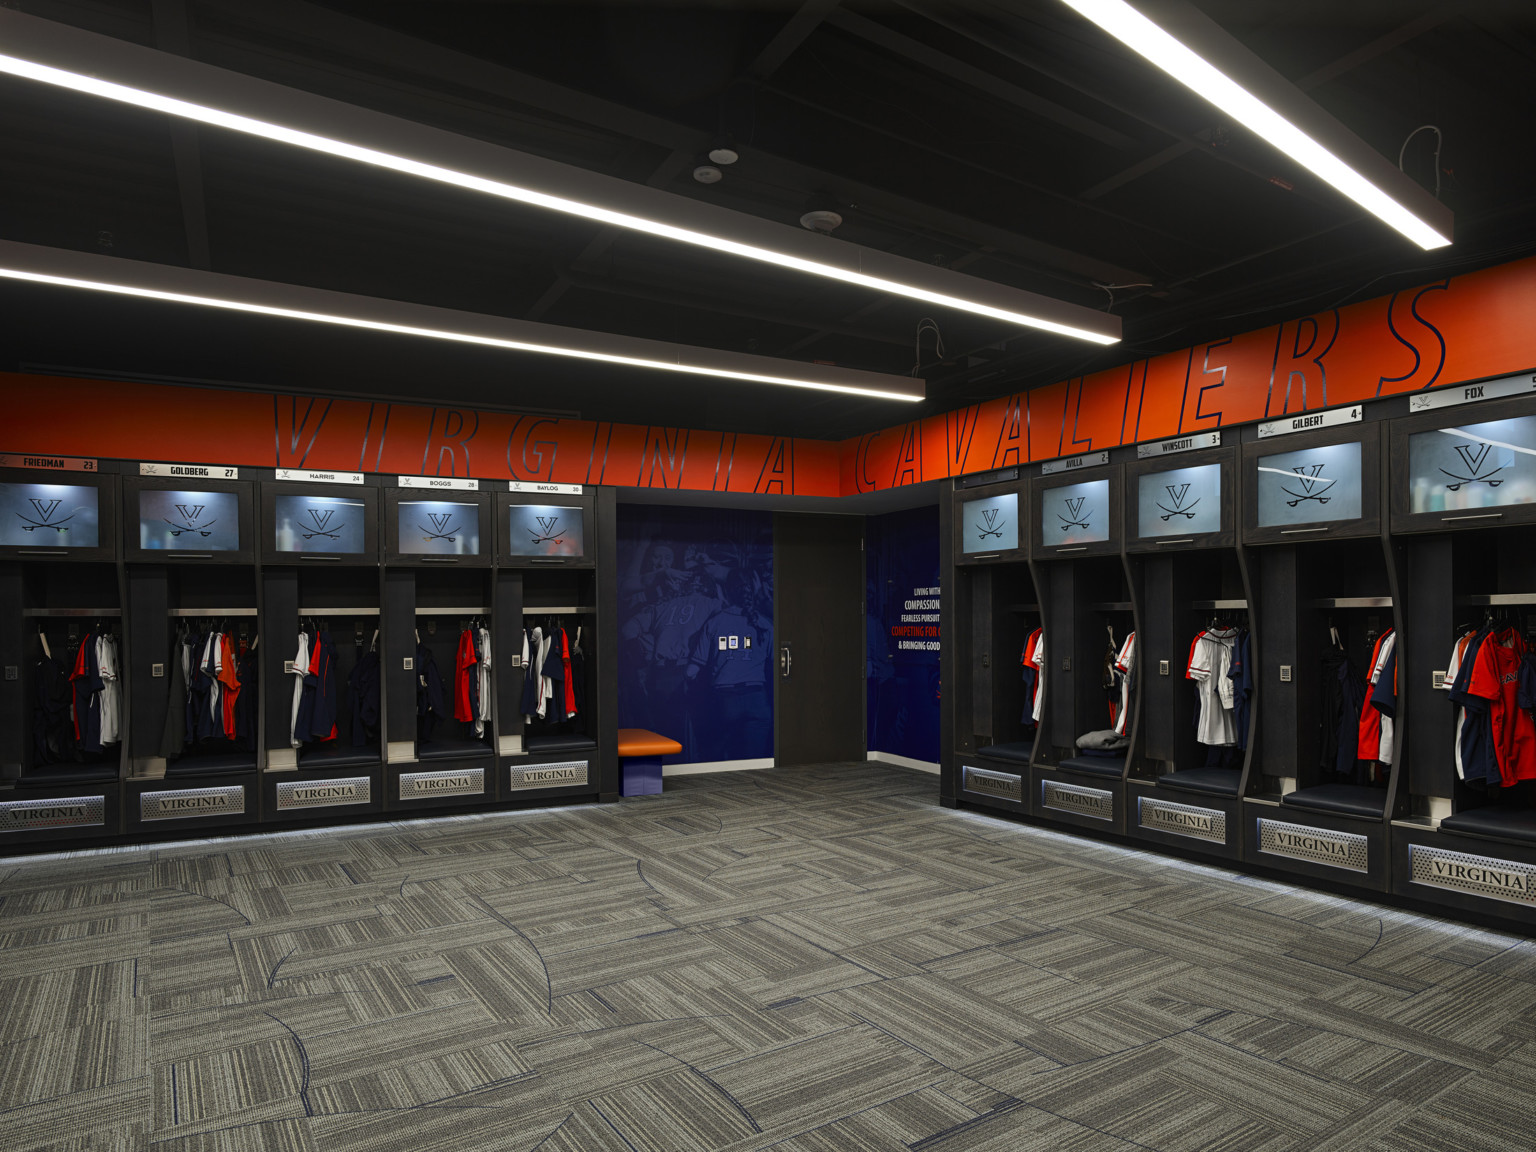 Interior locker room. Virginia Cavaliers written across corner of red wall over open lockers with cushioned seats. Blue mural